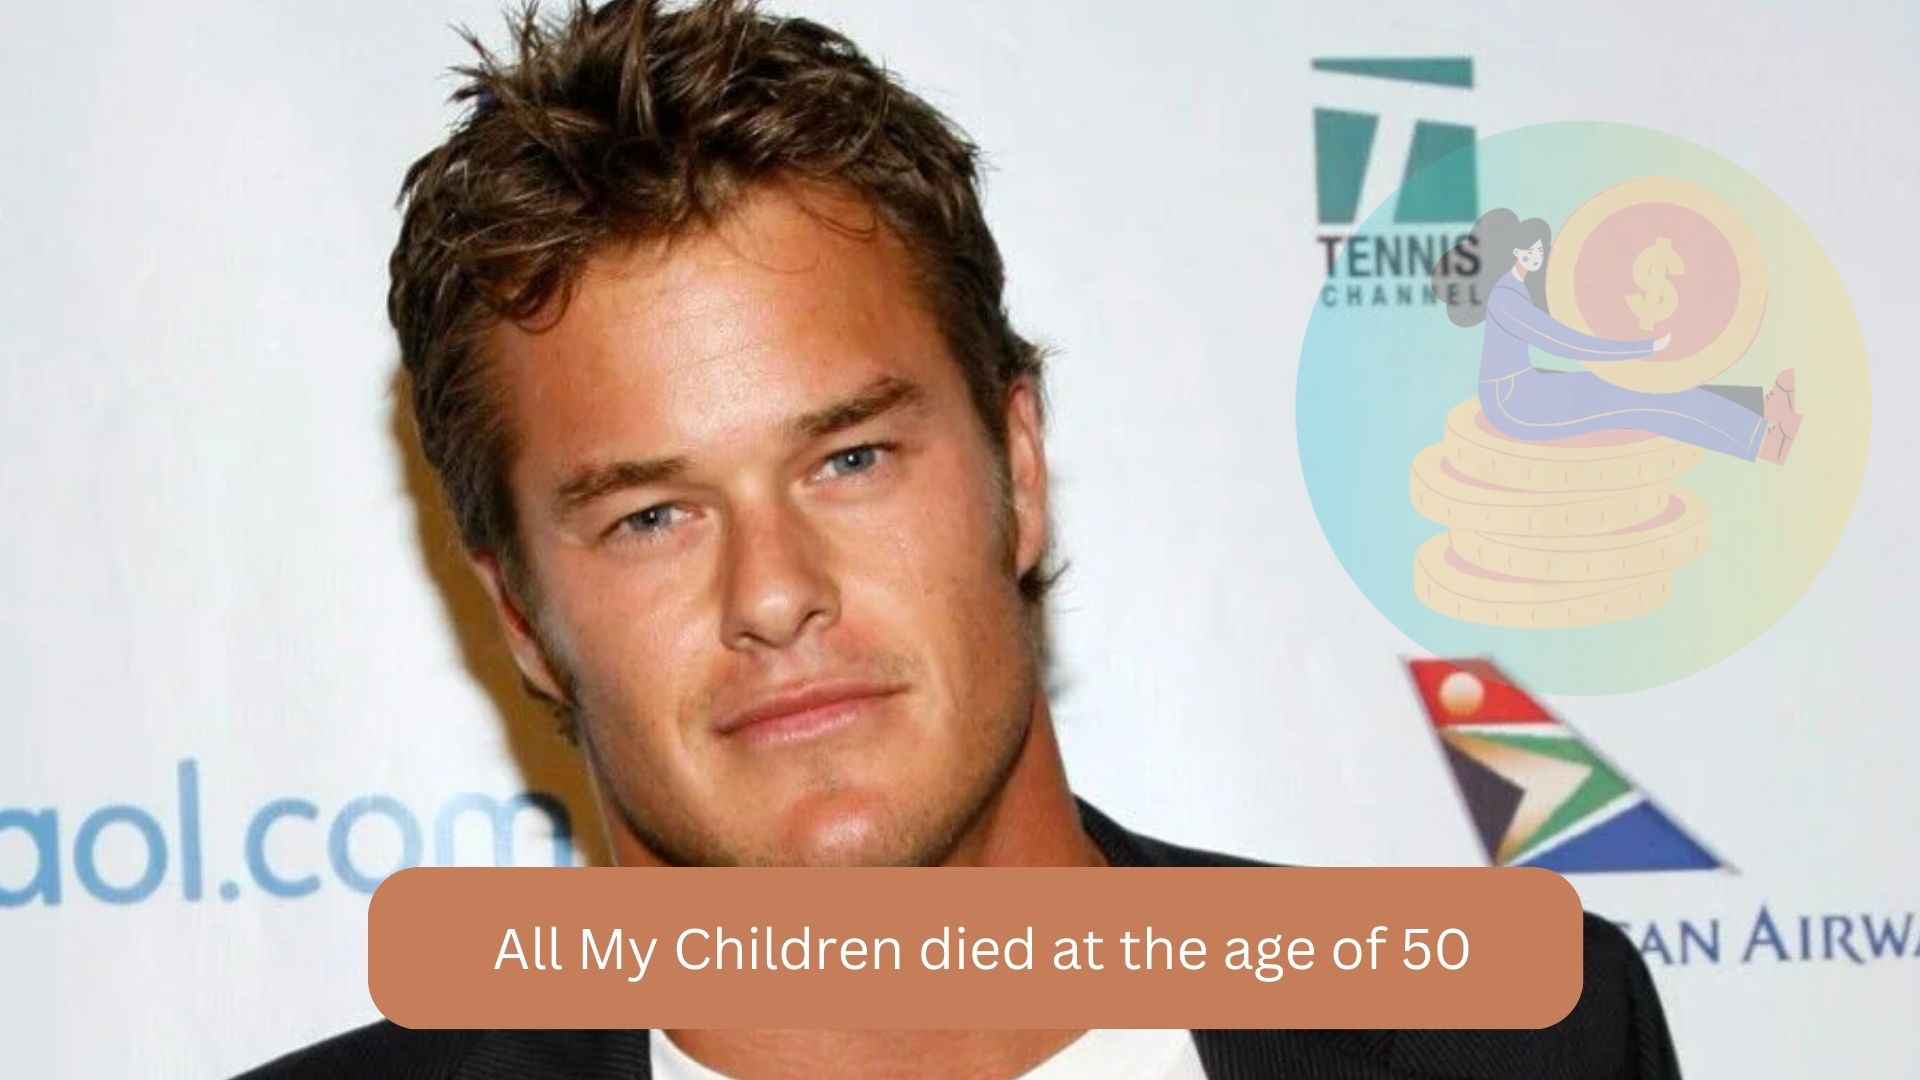 All My Children Star died at the age of 50